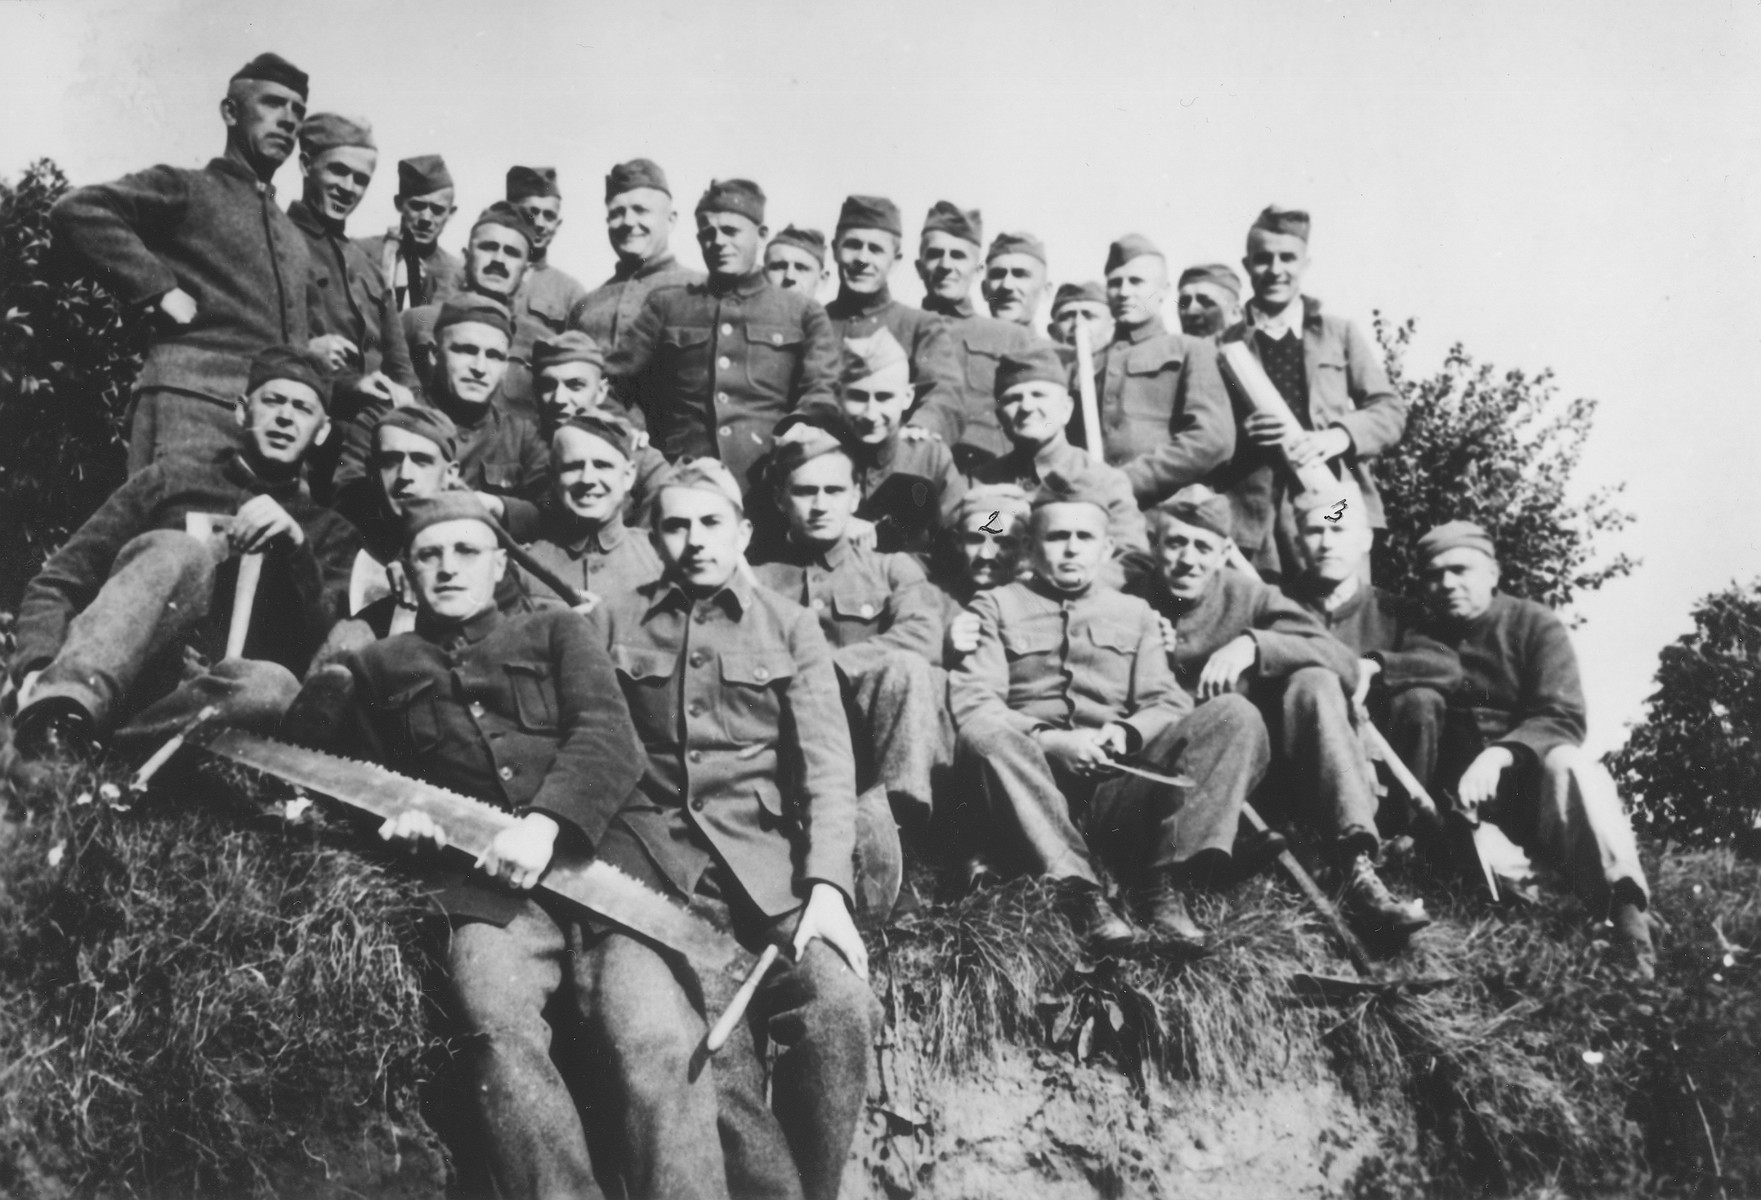 Group portrait of Czech political prisoners interned in Theresienstadt who were put to work felling trees.

Among those pictured is Oskar Bartolsic.